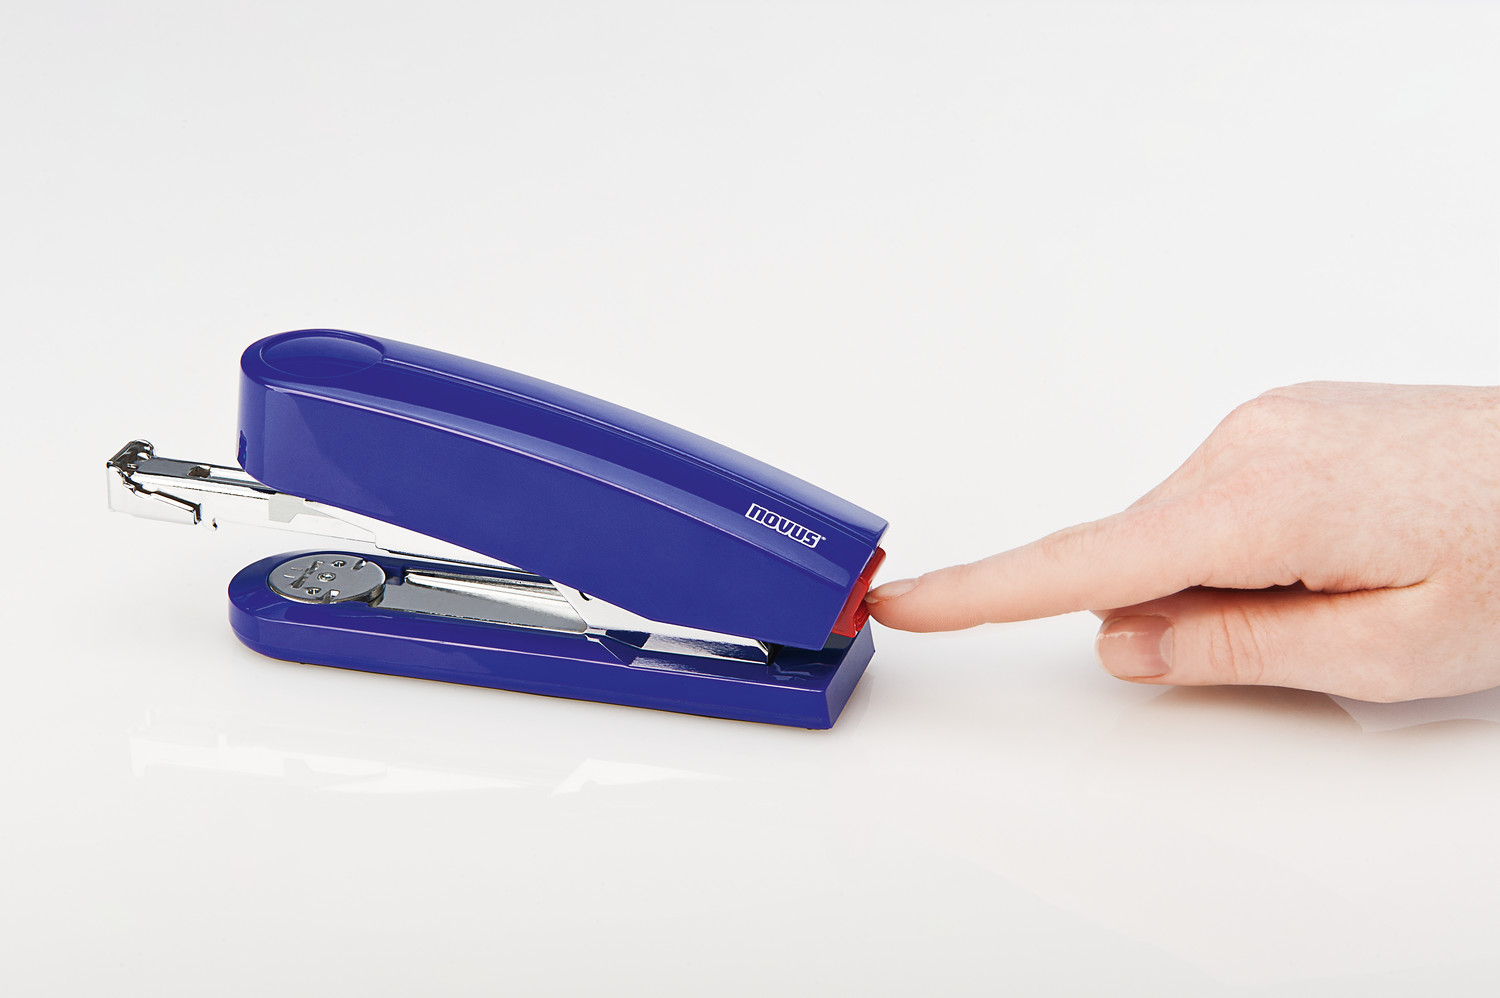 By pressing a button at the rear of the stapler, the staple magazine is released for front loading.